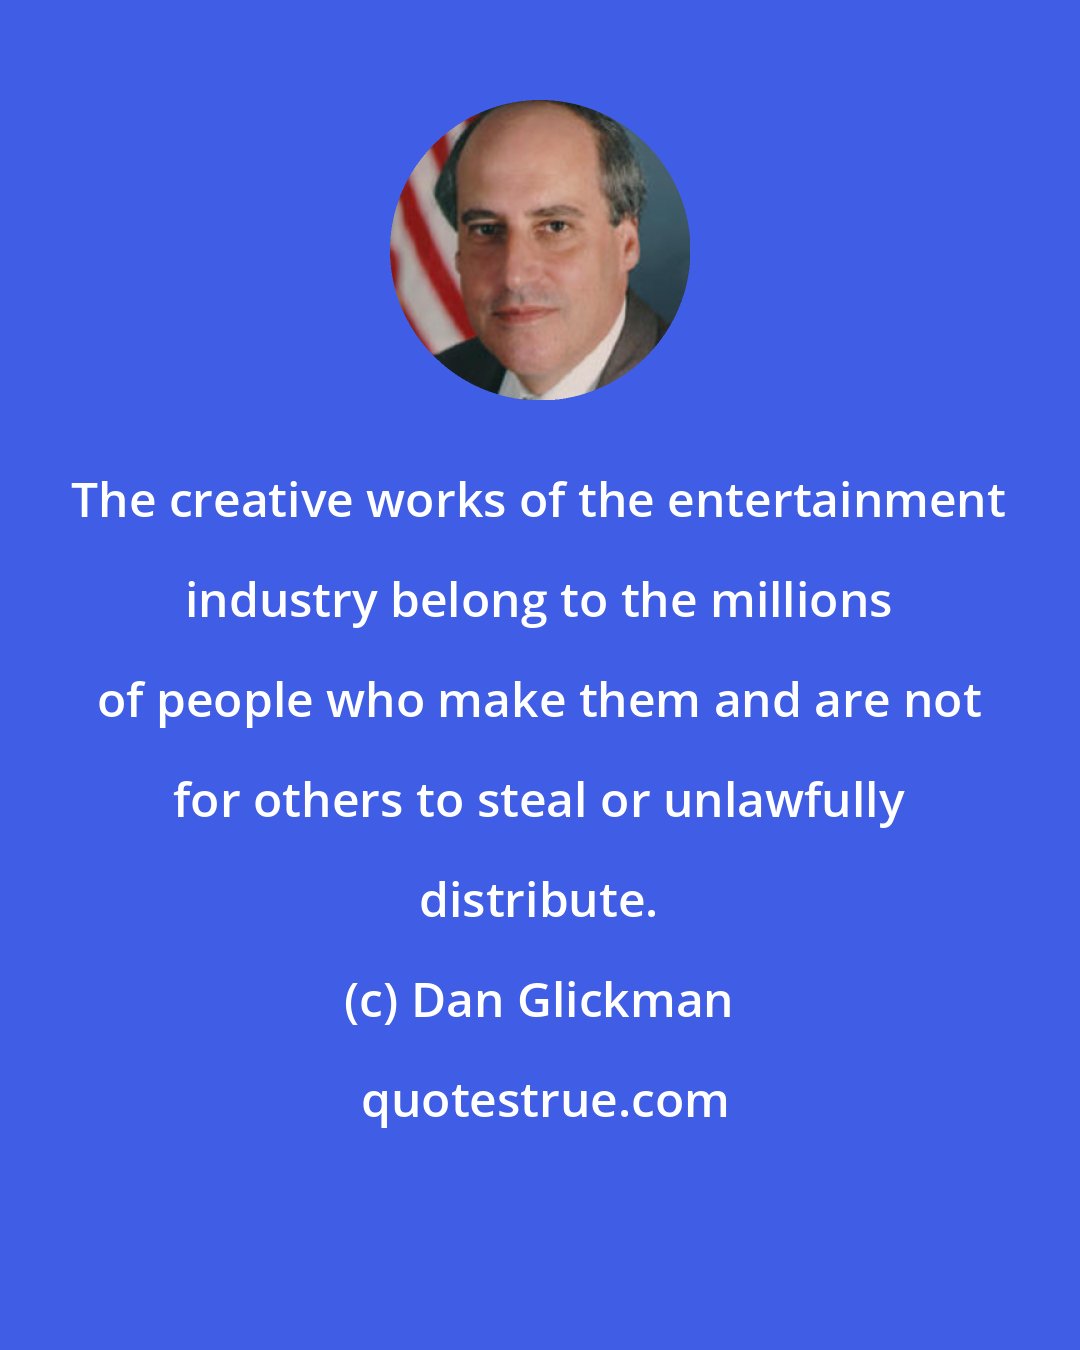 Dan Glickman: The creative works of the entertainment industry belong to the millions of people who make them and are not for others to steal or unlawfully distribute.